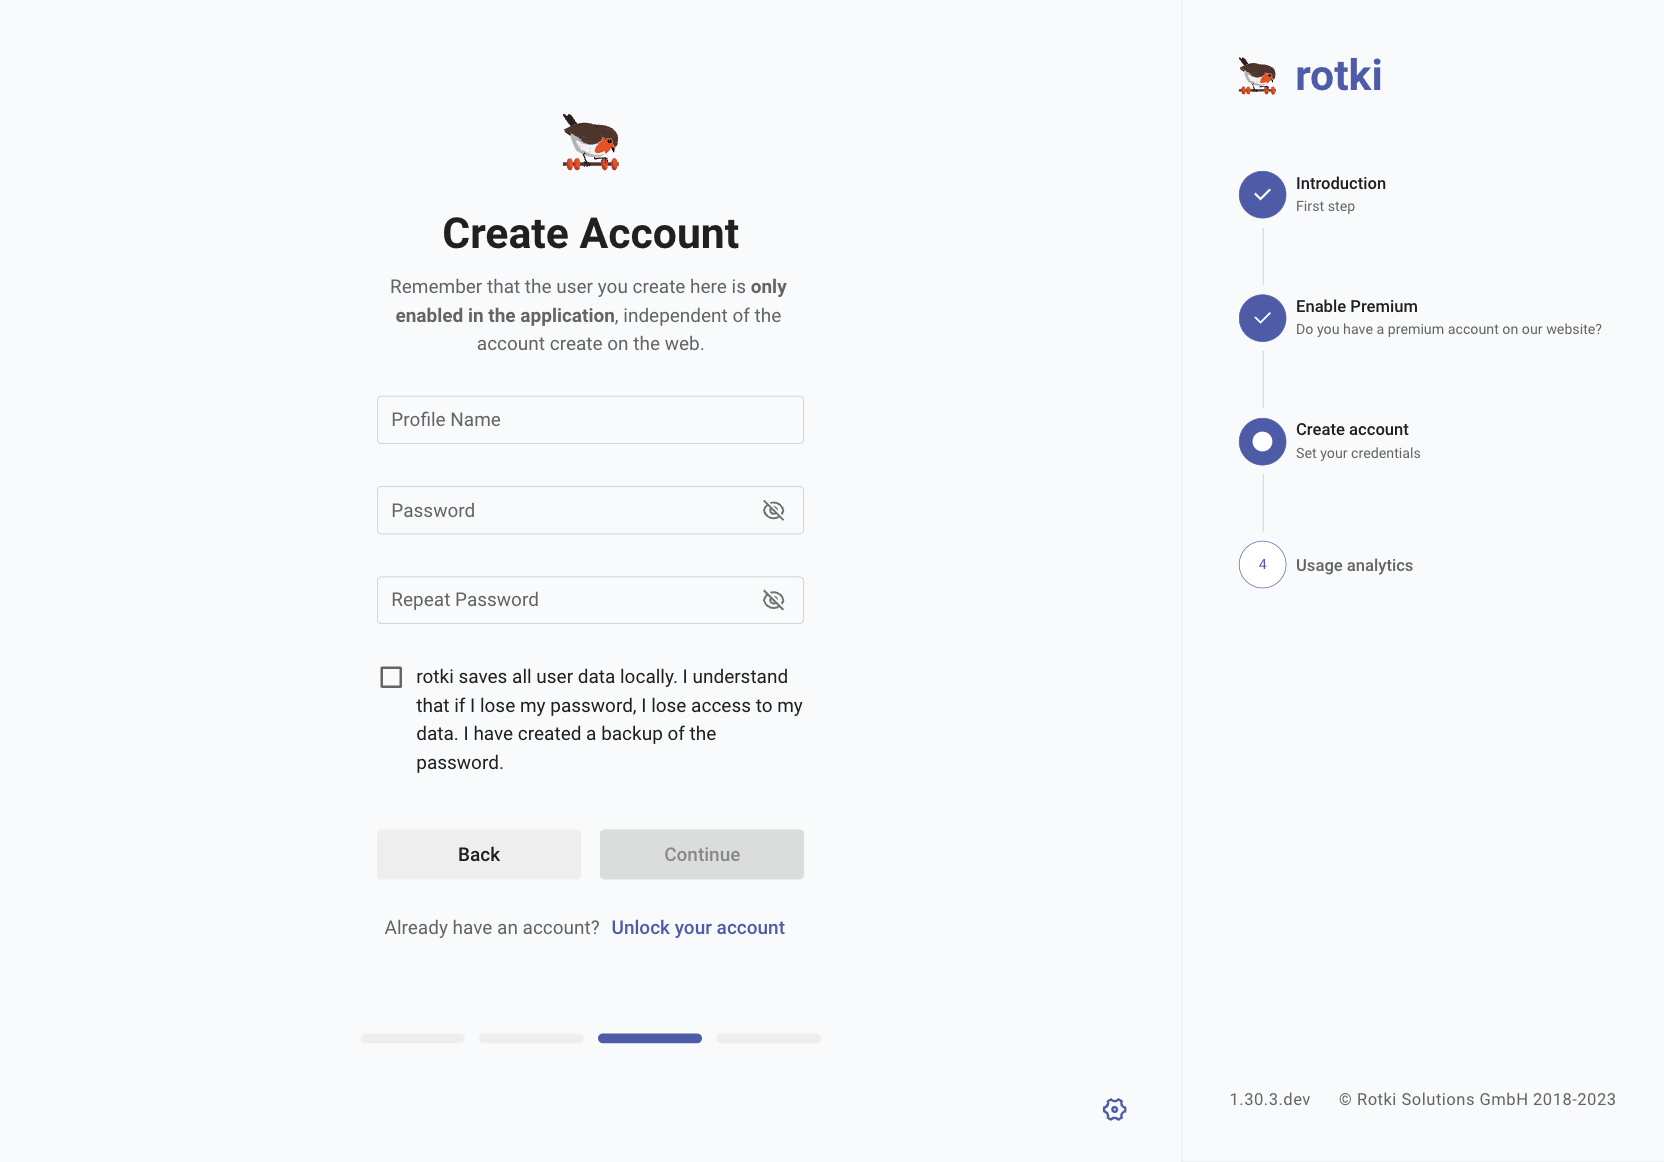 Creating a new account